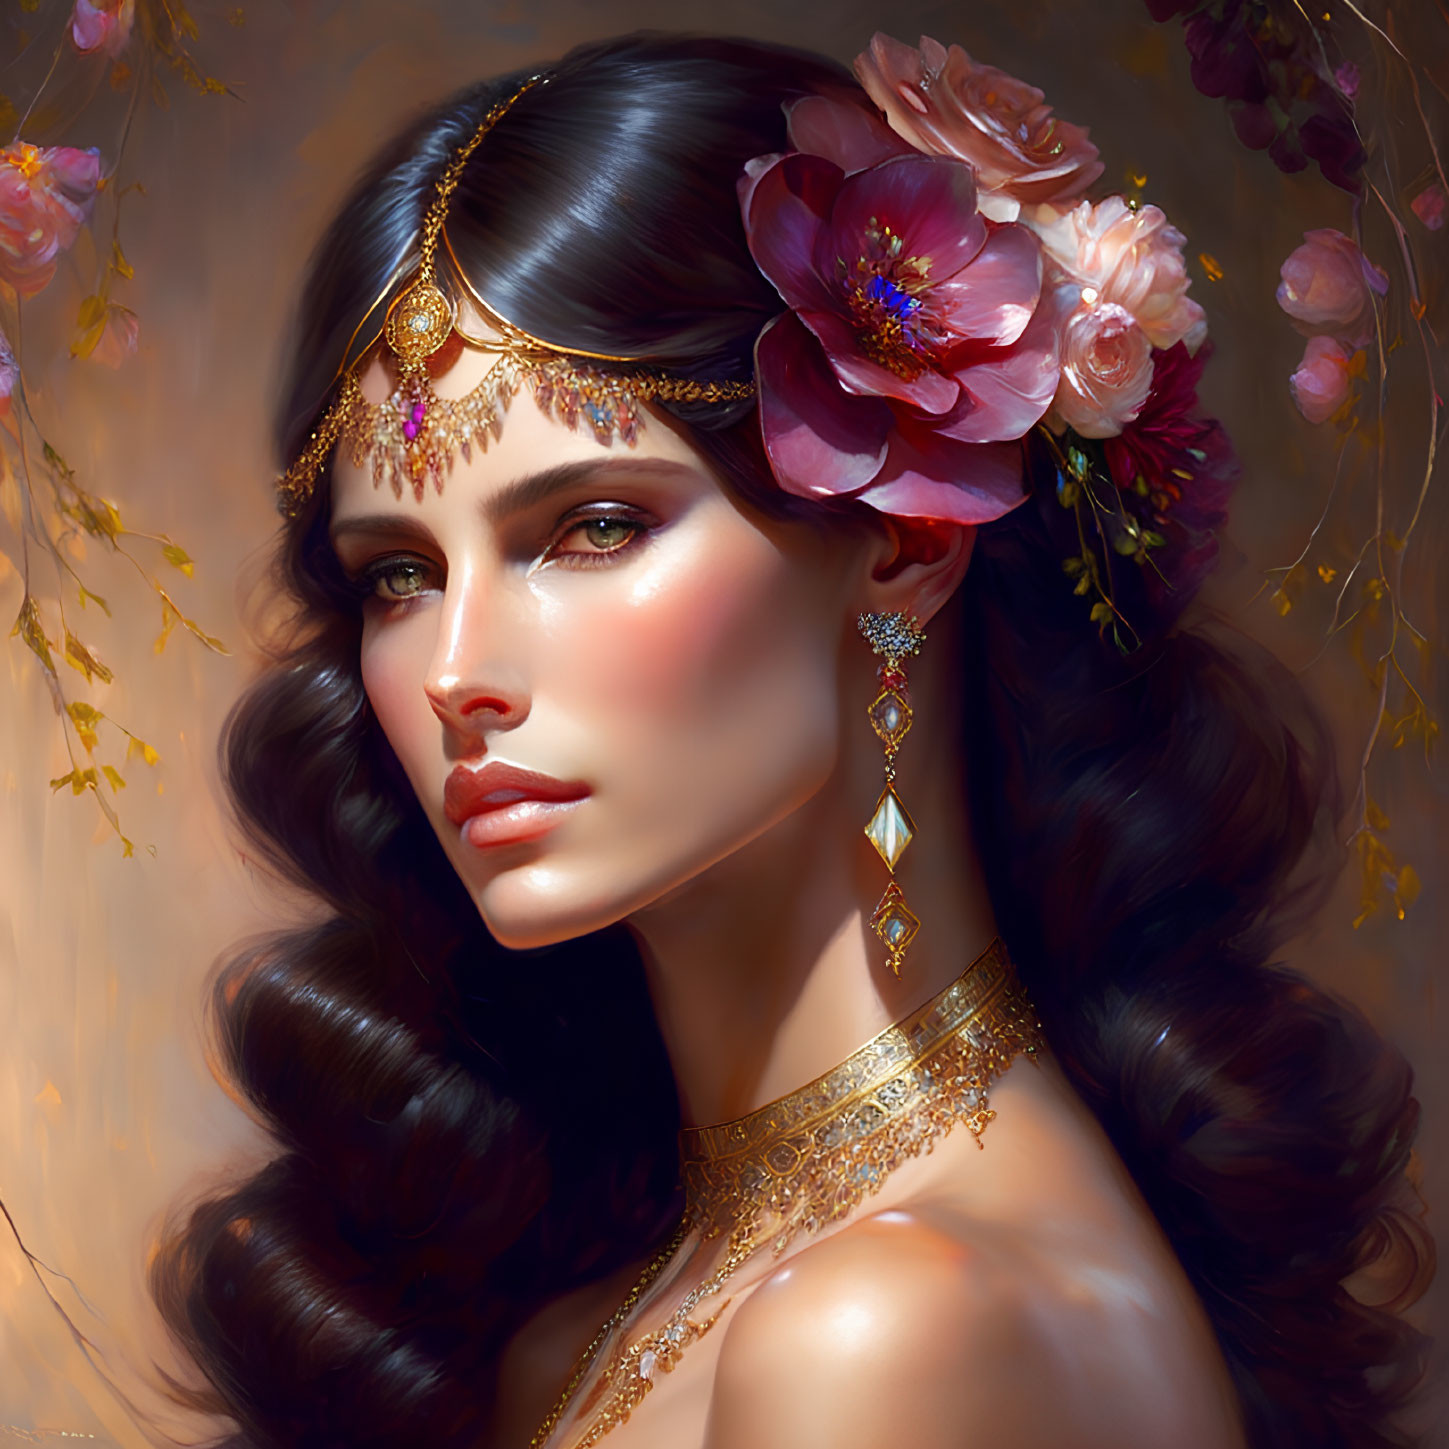 Digital portrait of woman with floral headpiece and gold jewelry in dreamy setting.